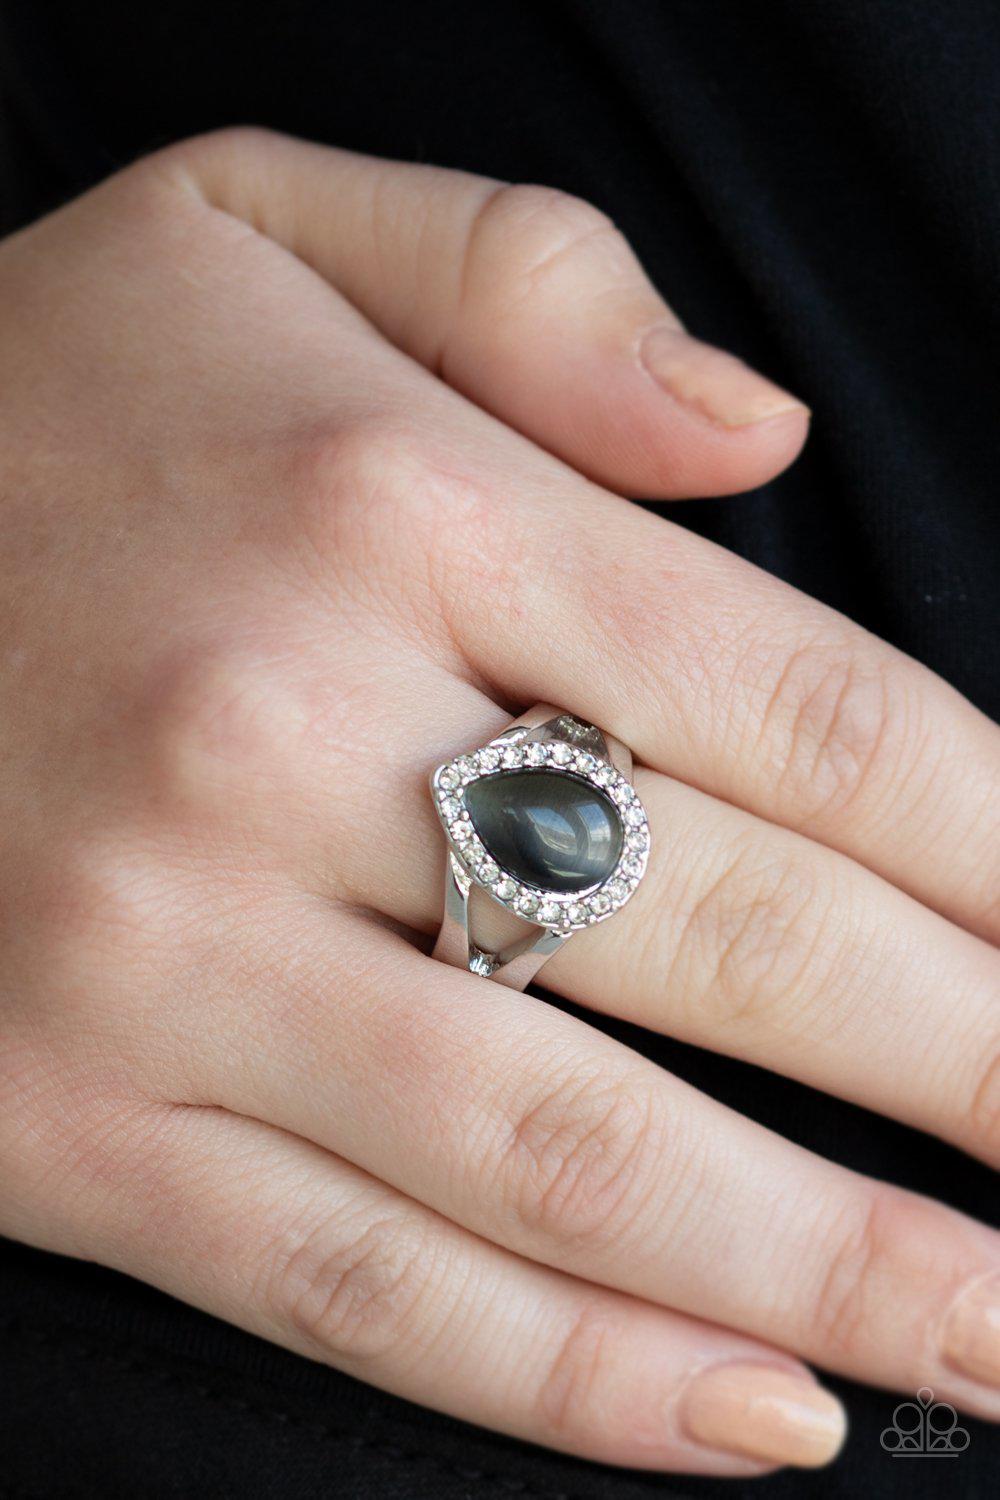 Debutante Dream Silver Moonstone Ring - Paparazzi Accessories-CarasShop.com - $5 Jewelry by Cara Jewels